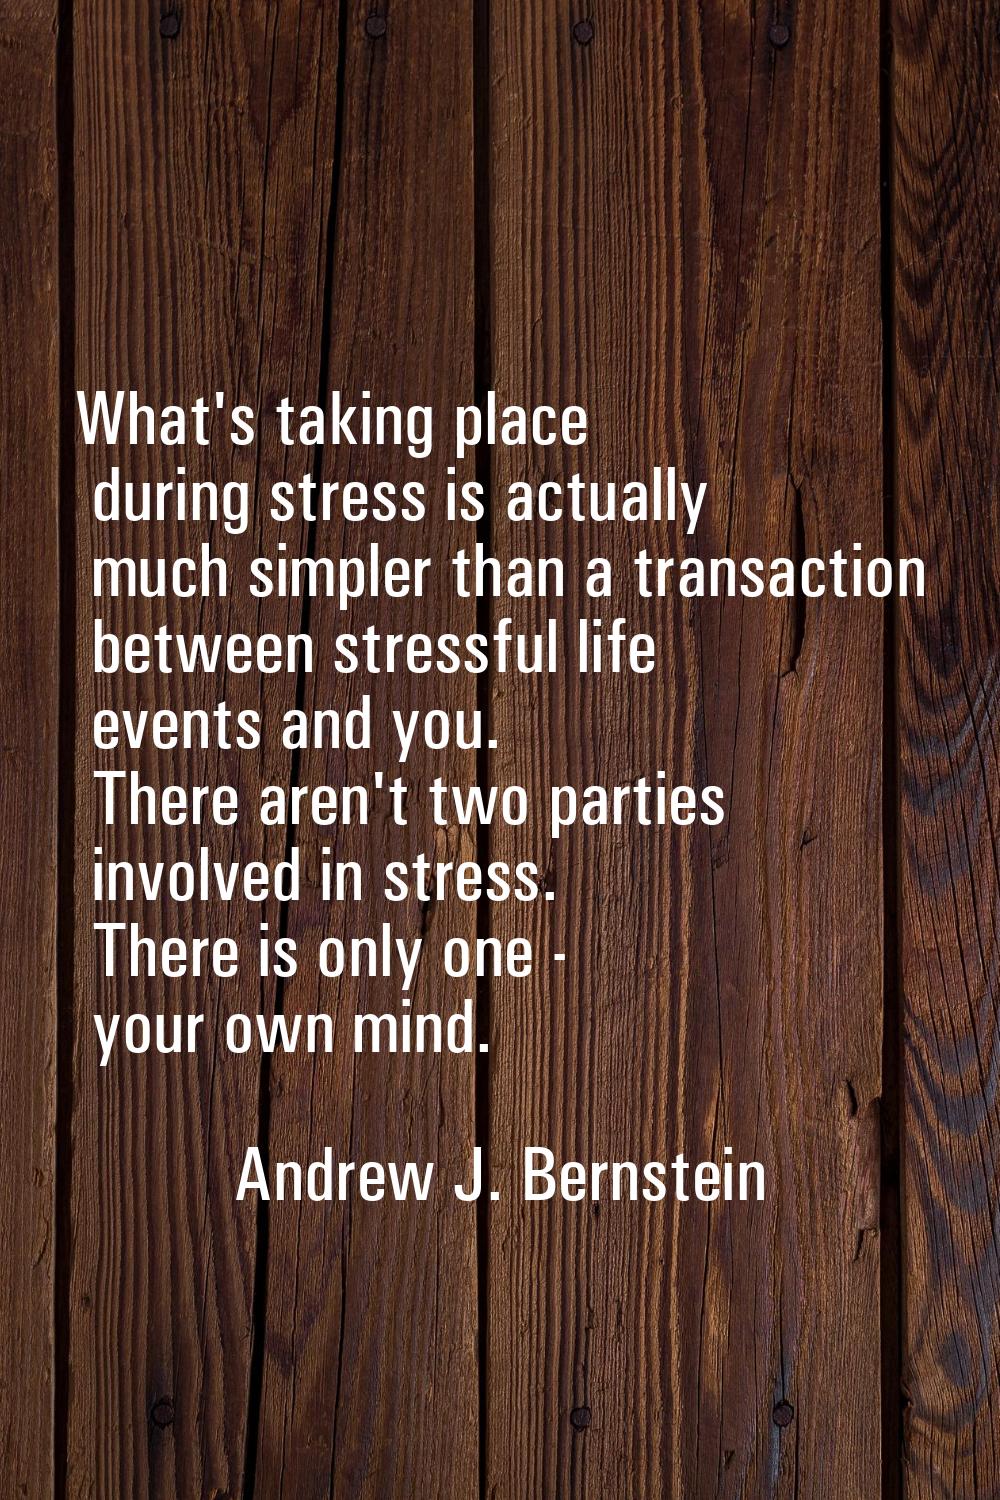 What's taking place during stress is actually much simpler than a transaction between stressful lif